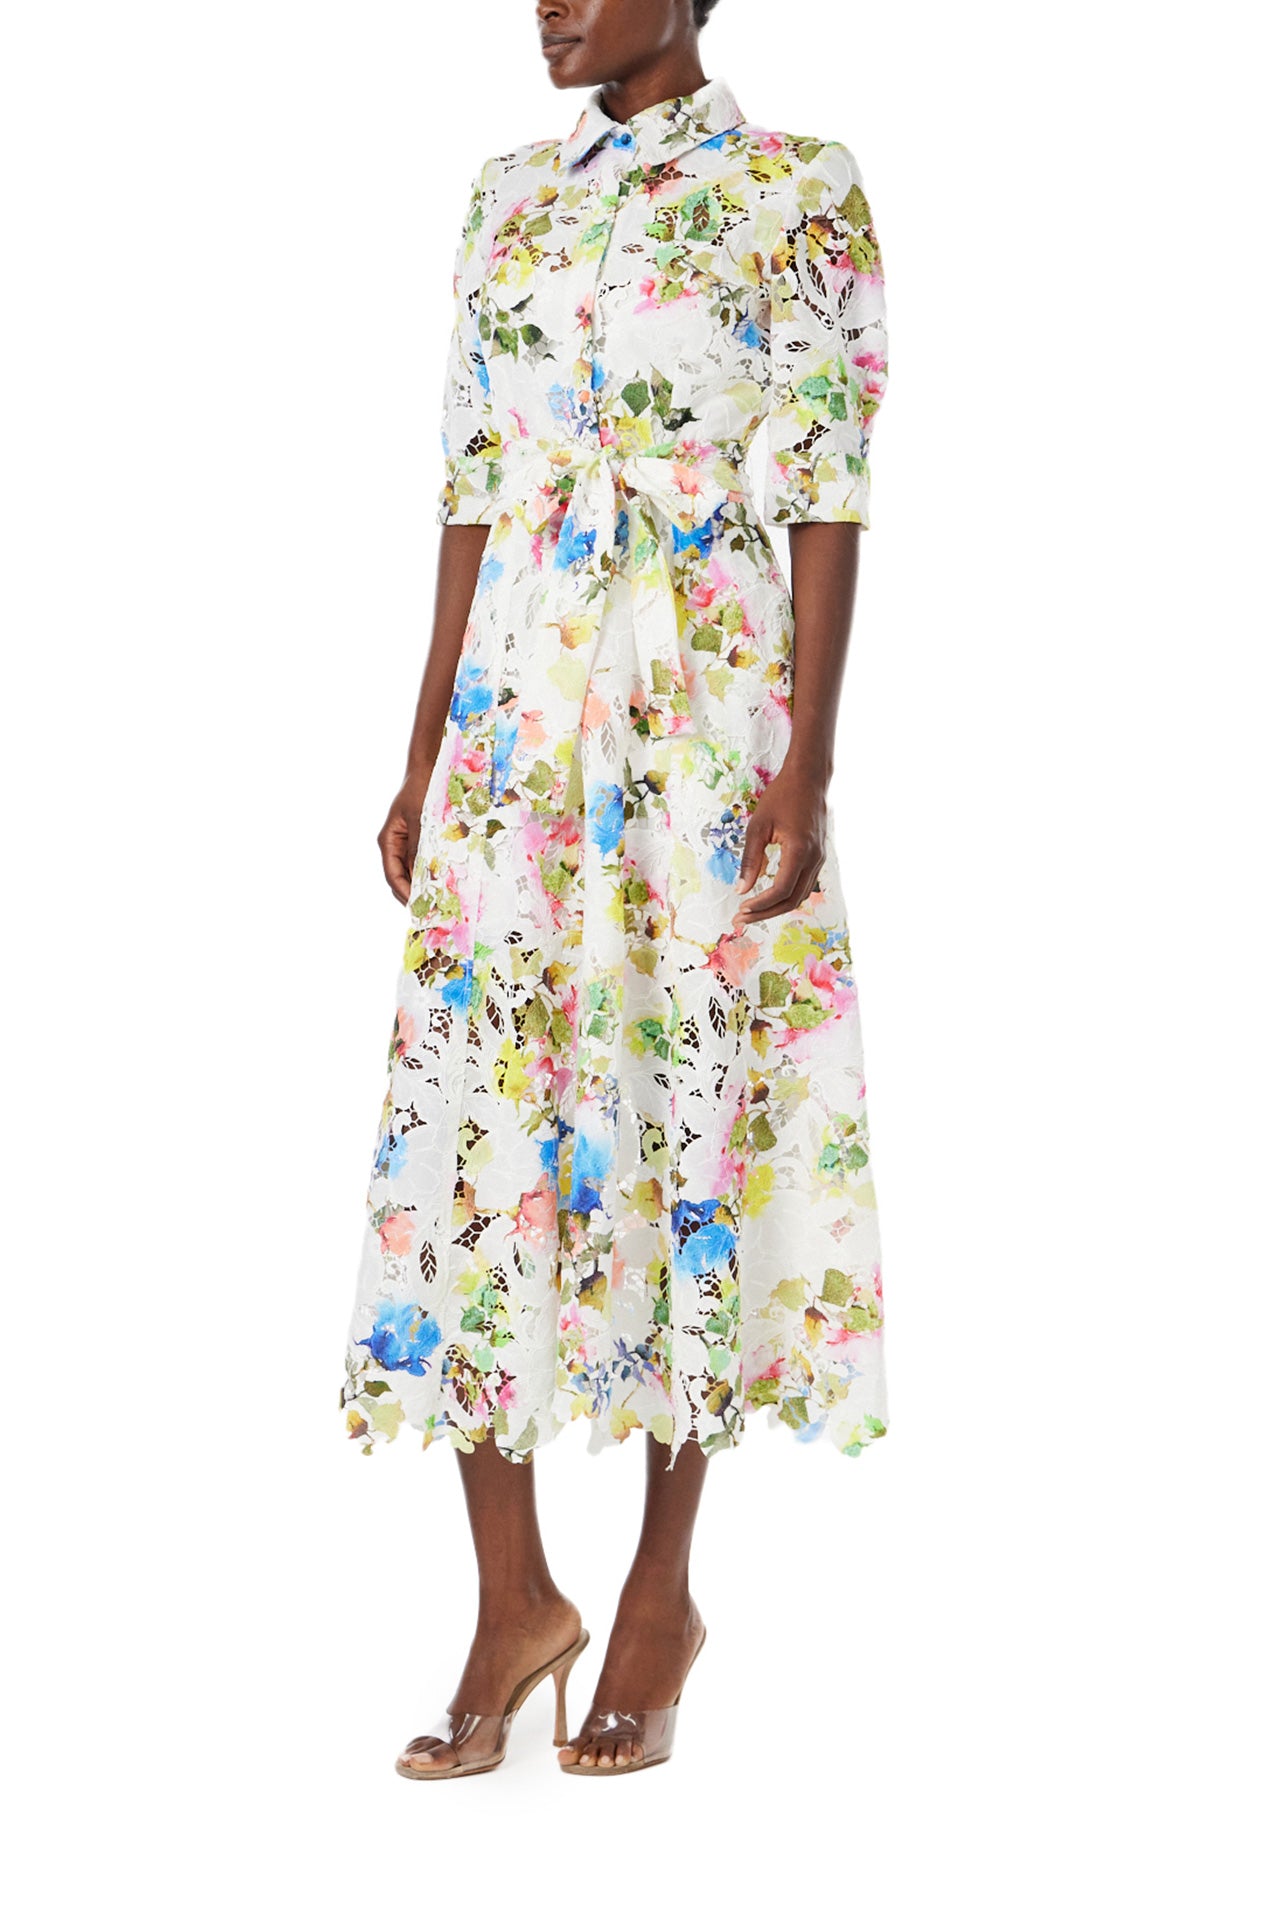 Monique Lhuillier Spring 2024 silk white floral printed lace shirt dress with pockets and a scalloped hem - left side.